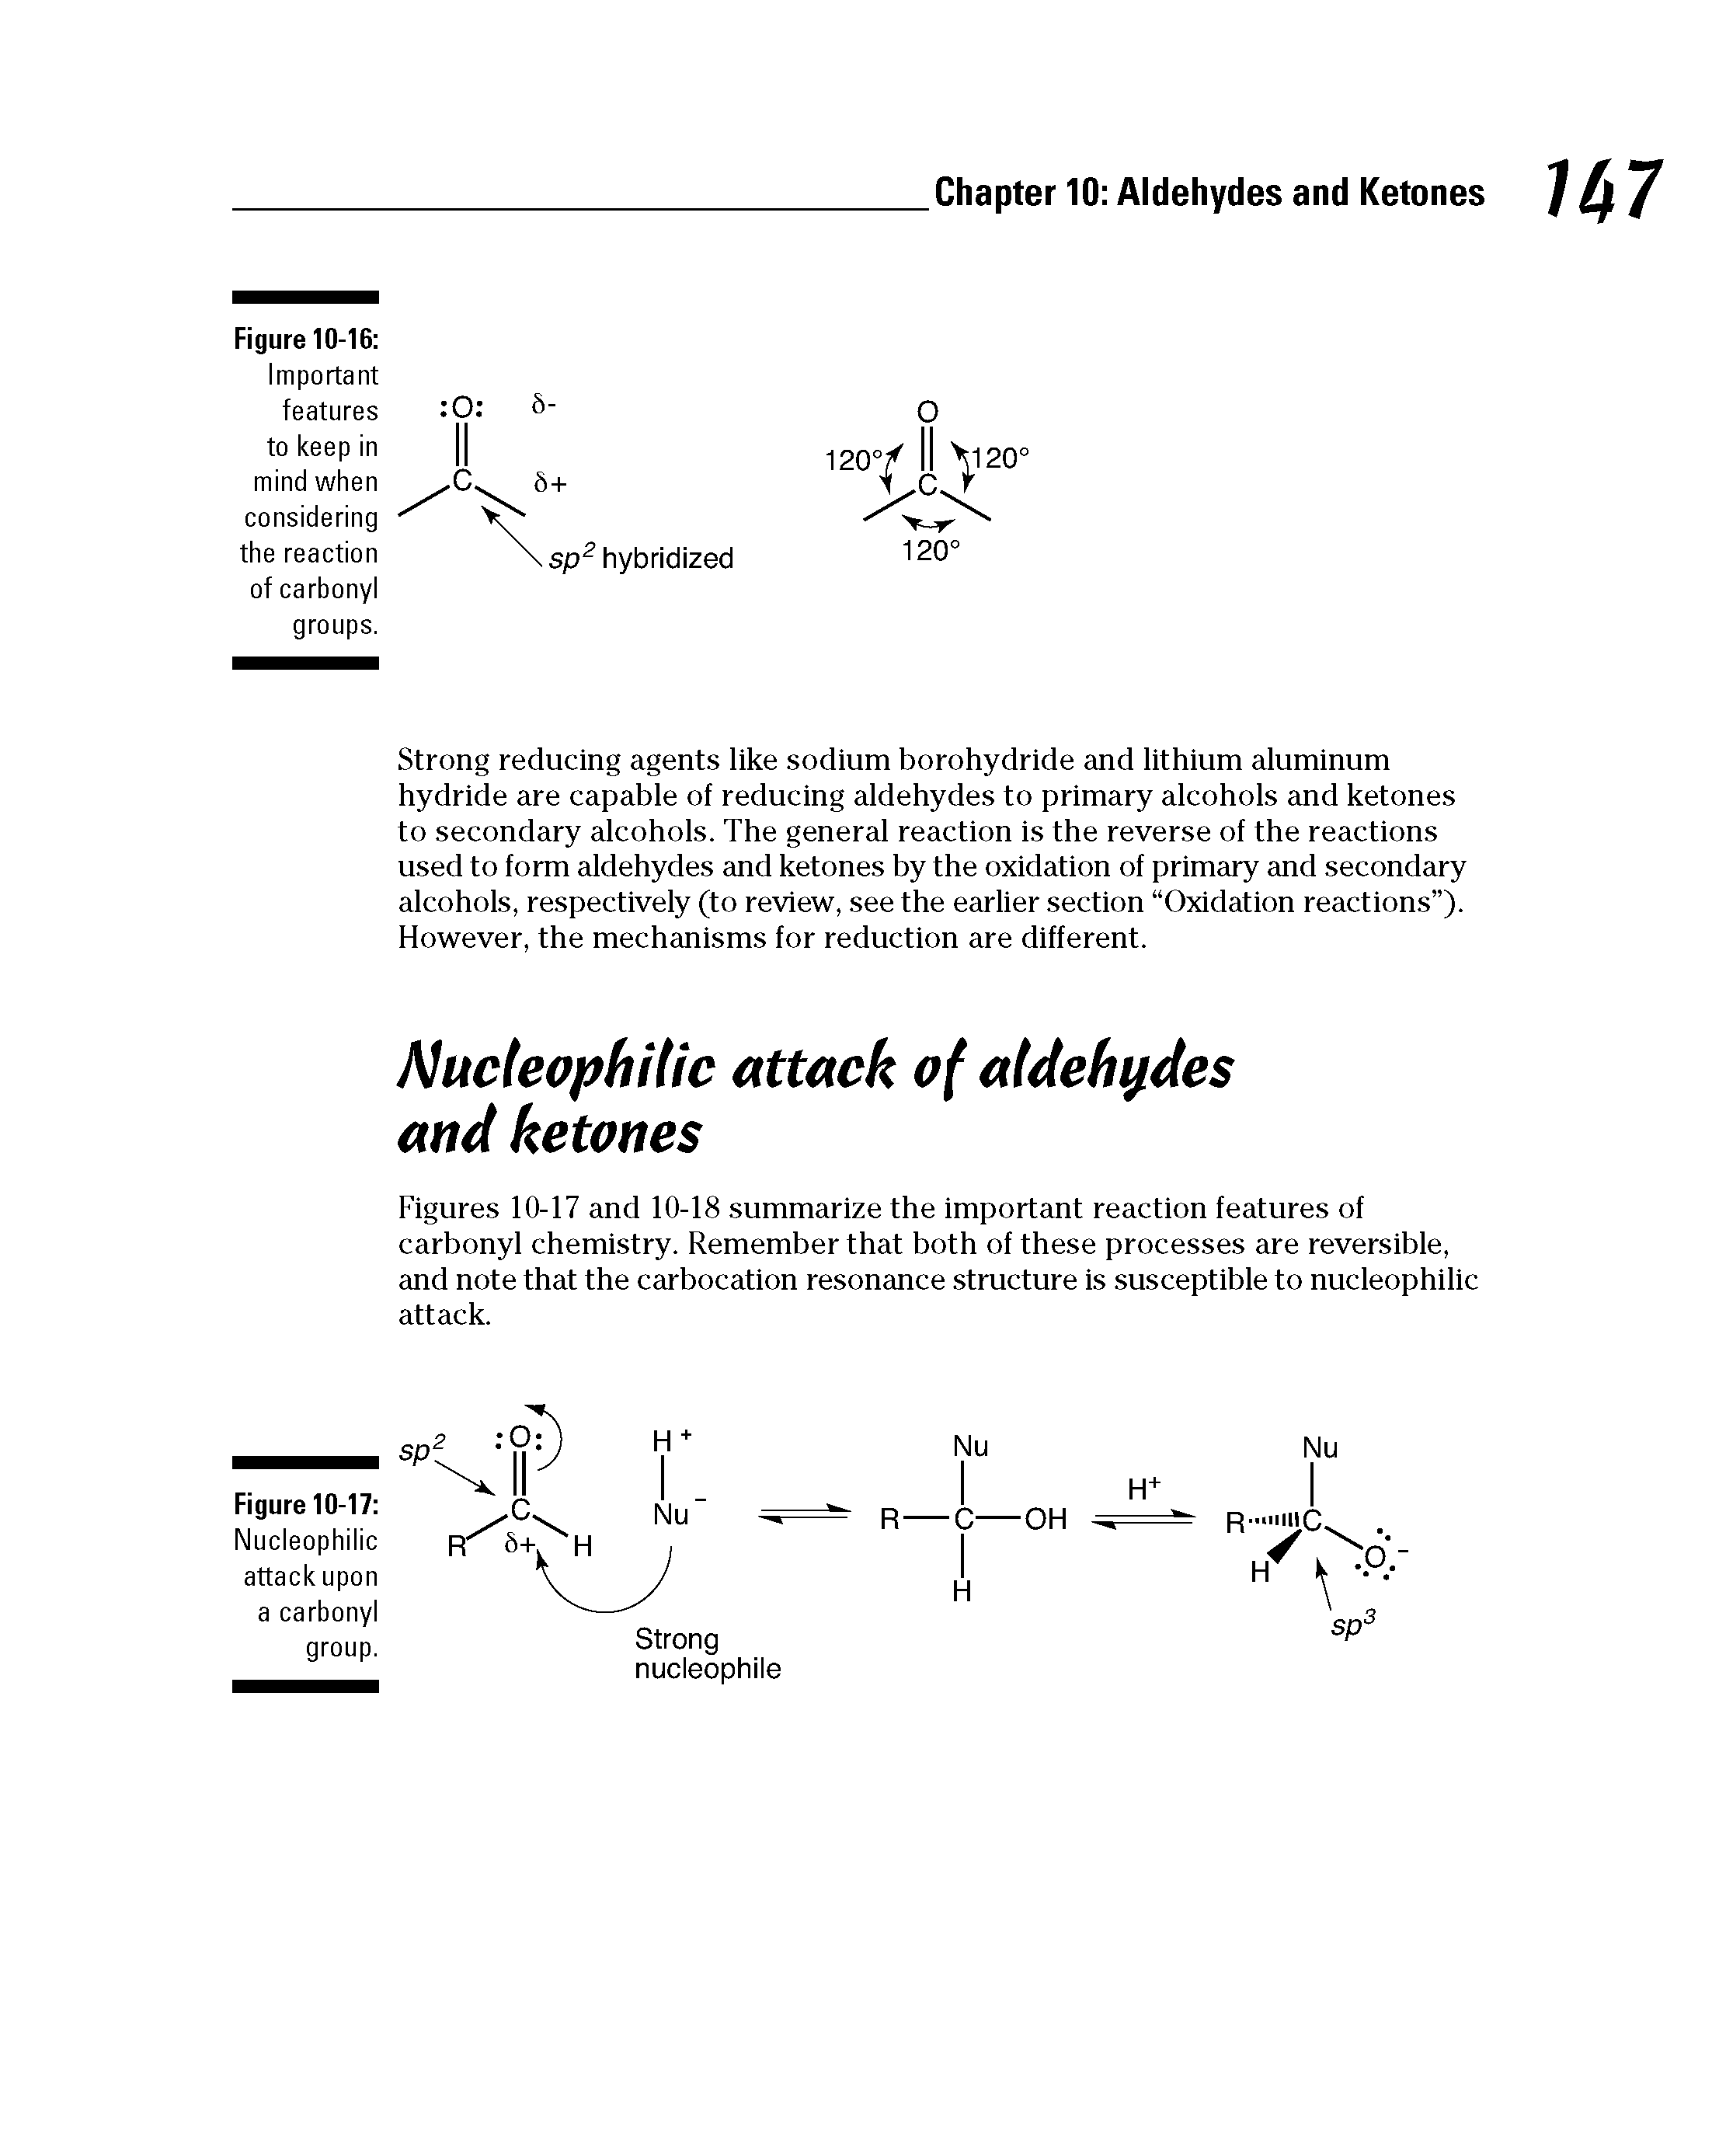 Figures 10-17 and 10-18 summarize the important reaction features of carbonyl chemistry. Remember that both of these processes are reversible, and note that the carbocation resonance structure is susceptible to nucleophilic attack.